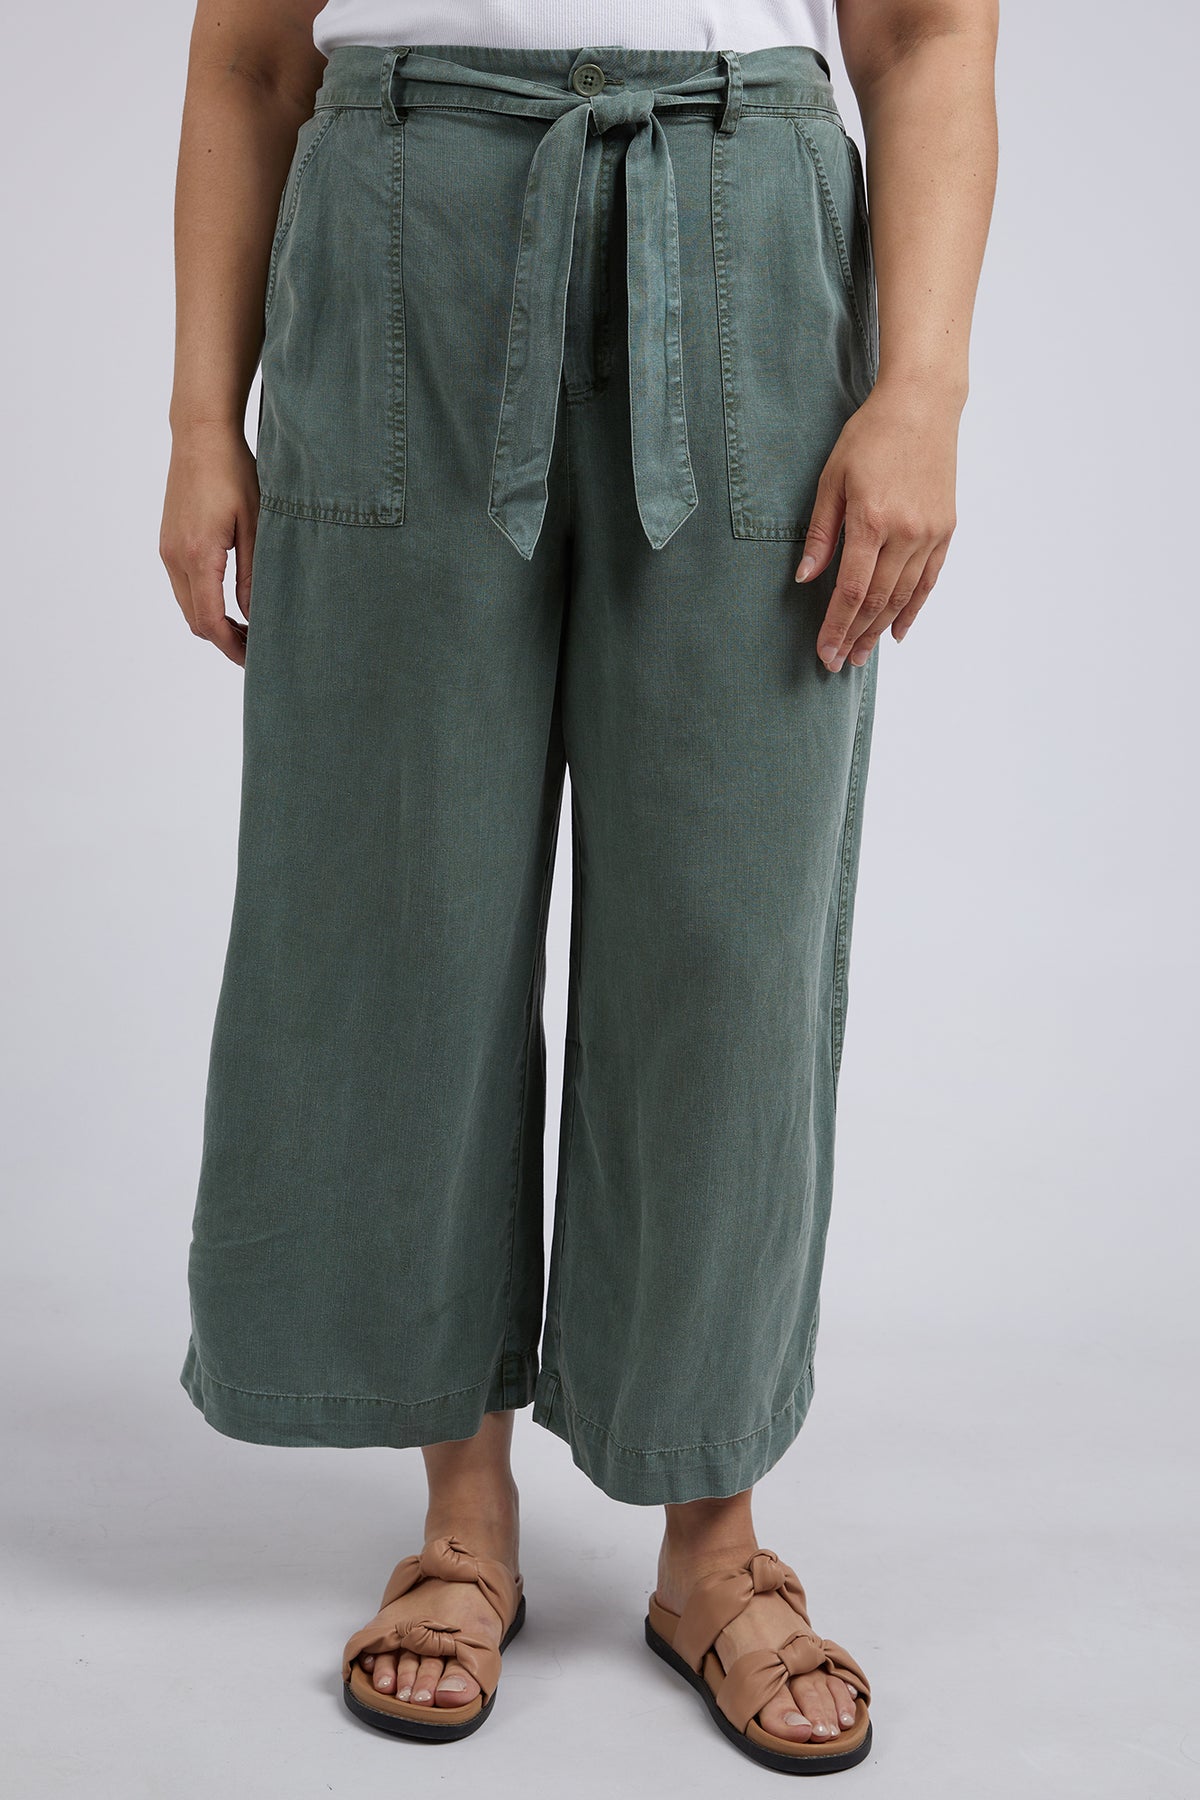 Bliss Washed Pant Clover